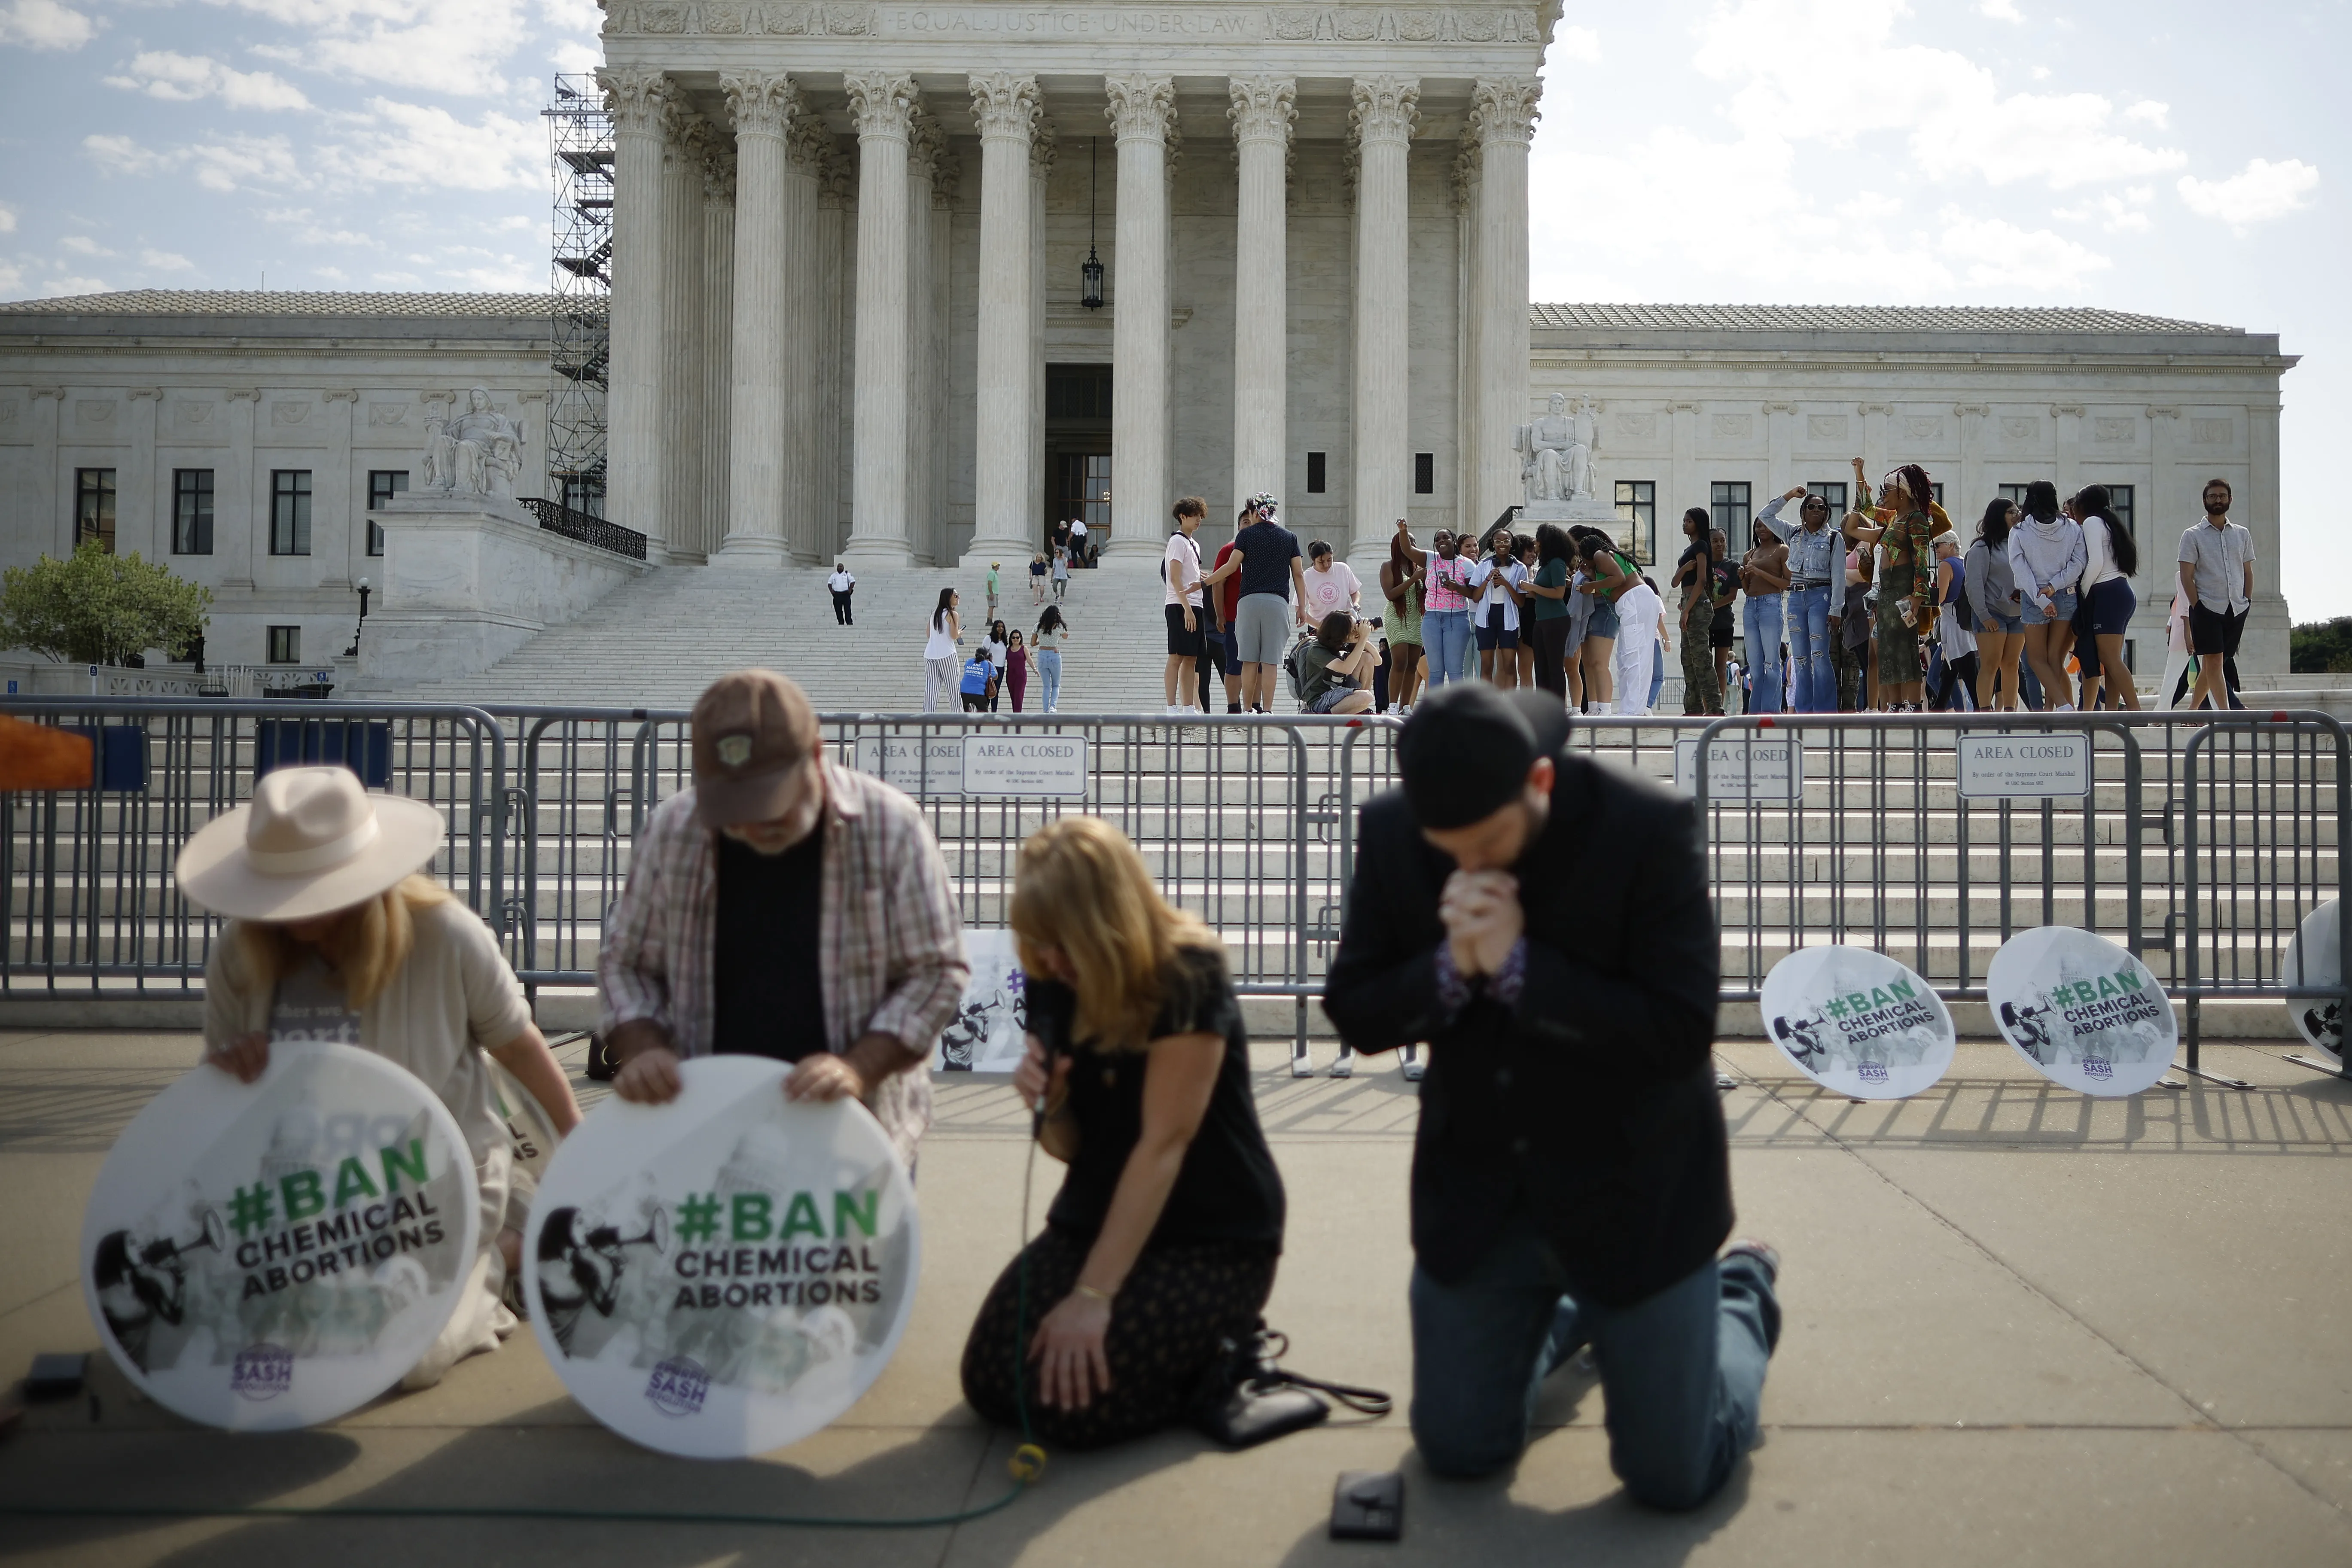 Katie Mahoney, Rev. Pat Mahoney, Peggy Nienaber of Faith and Liberty, and Mark Lee Dickson of Right to Life East Texas pray in front of the U.S. Supreme Court on April 21, 2023, in Washington, D.C.?w=200&h=150